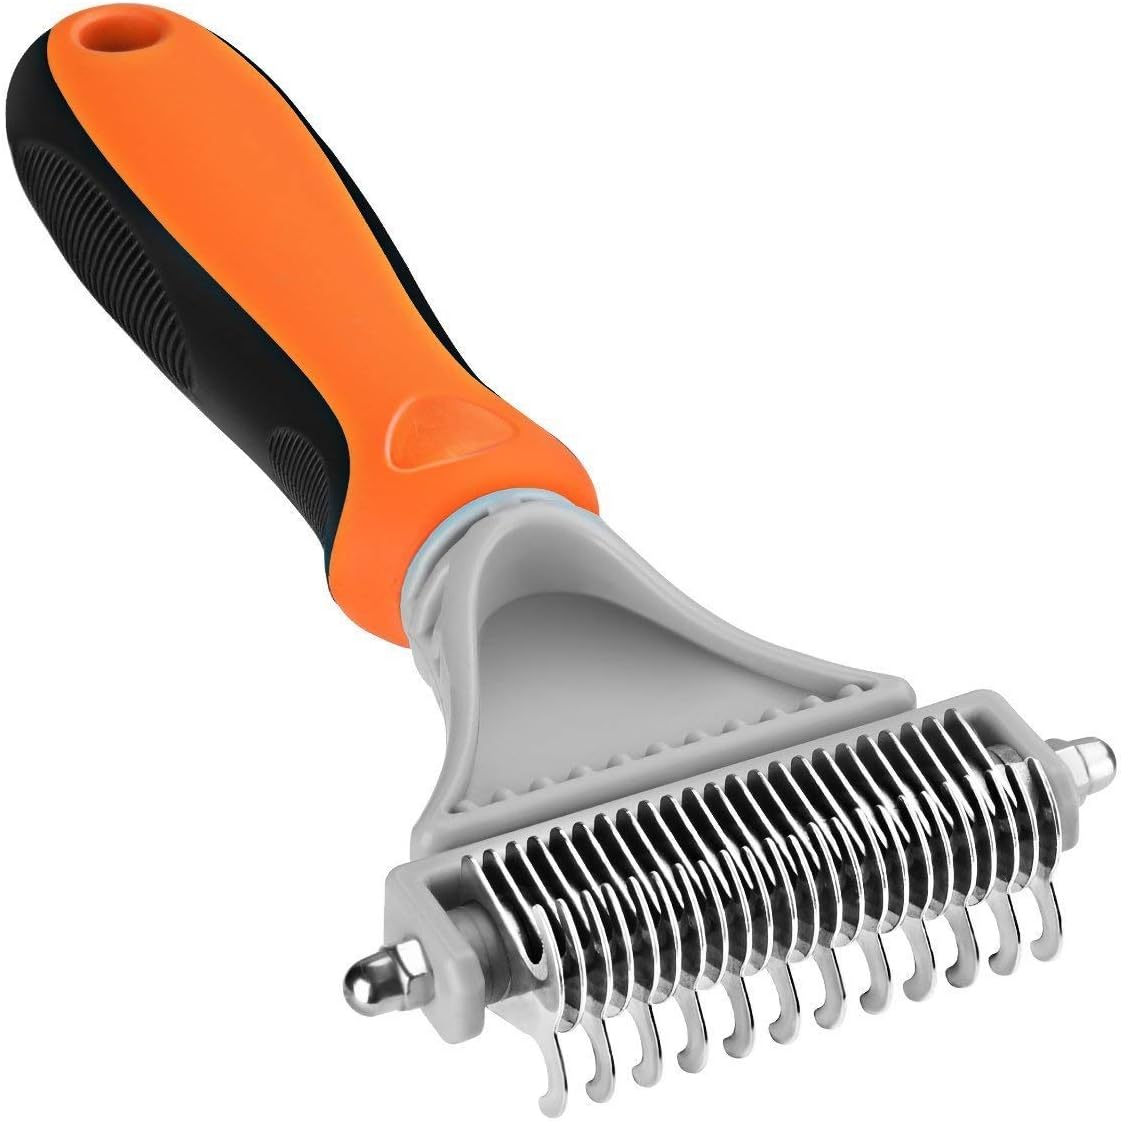 OMORC Dog Dematting Comb, Pet Grooming Brush Deshedding Tool 23+12 Double Sided Teeth Undercoat Rake, Dog or for Small, Medium, Large Dogs, Cats and Horses with Short or Long Hair